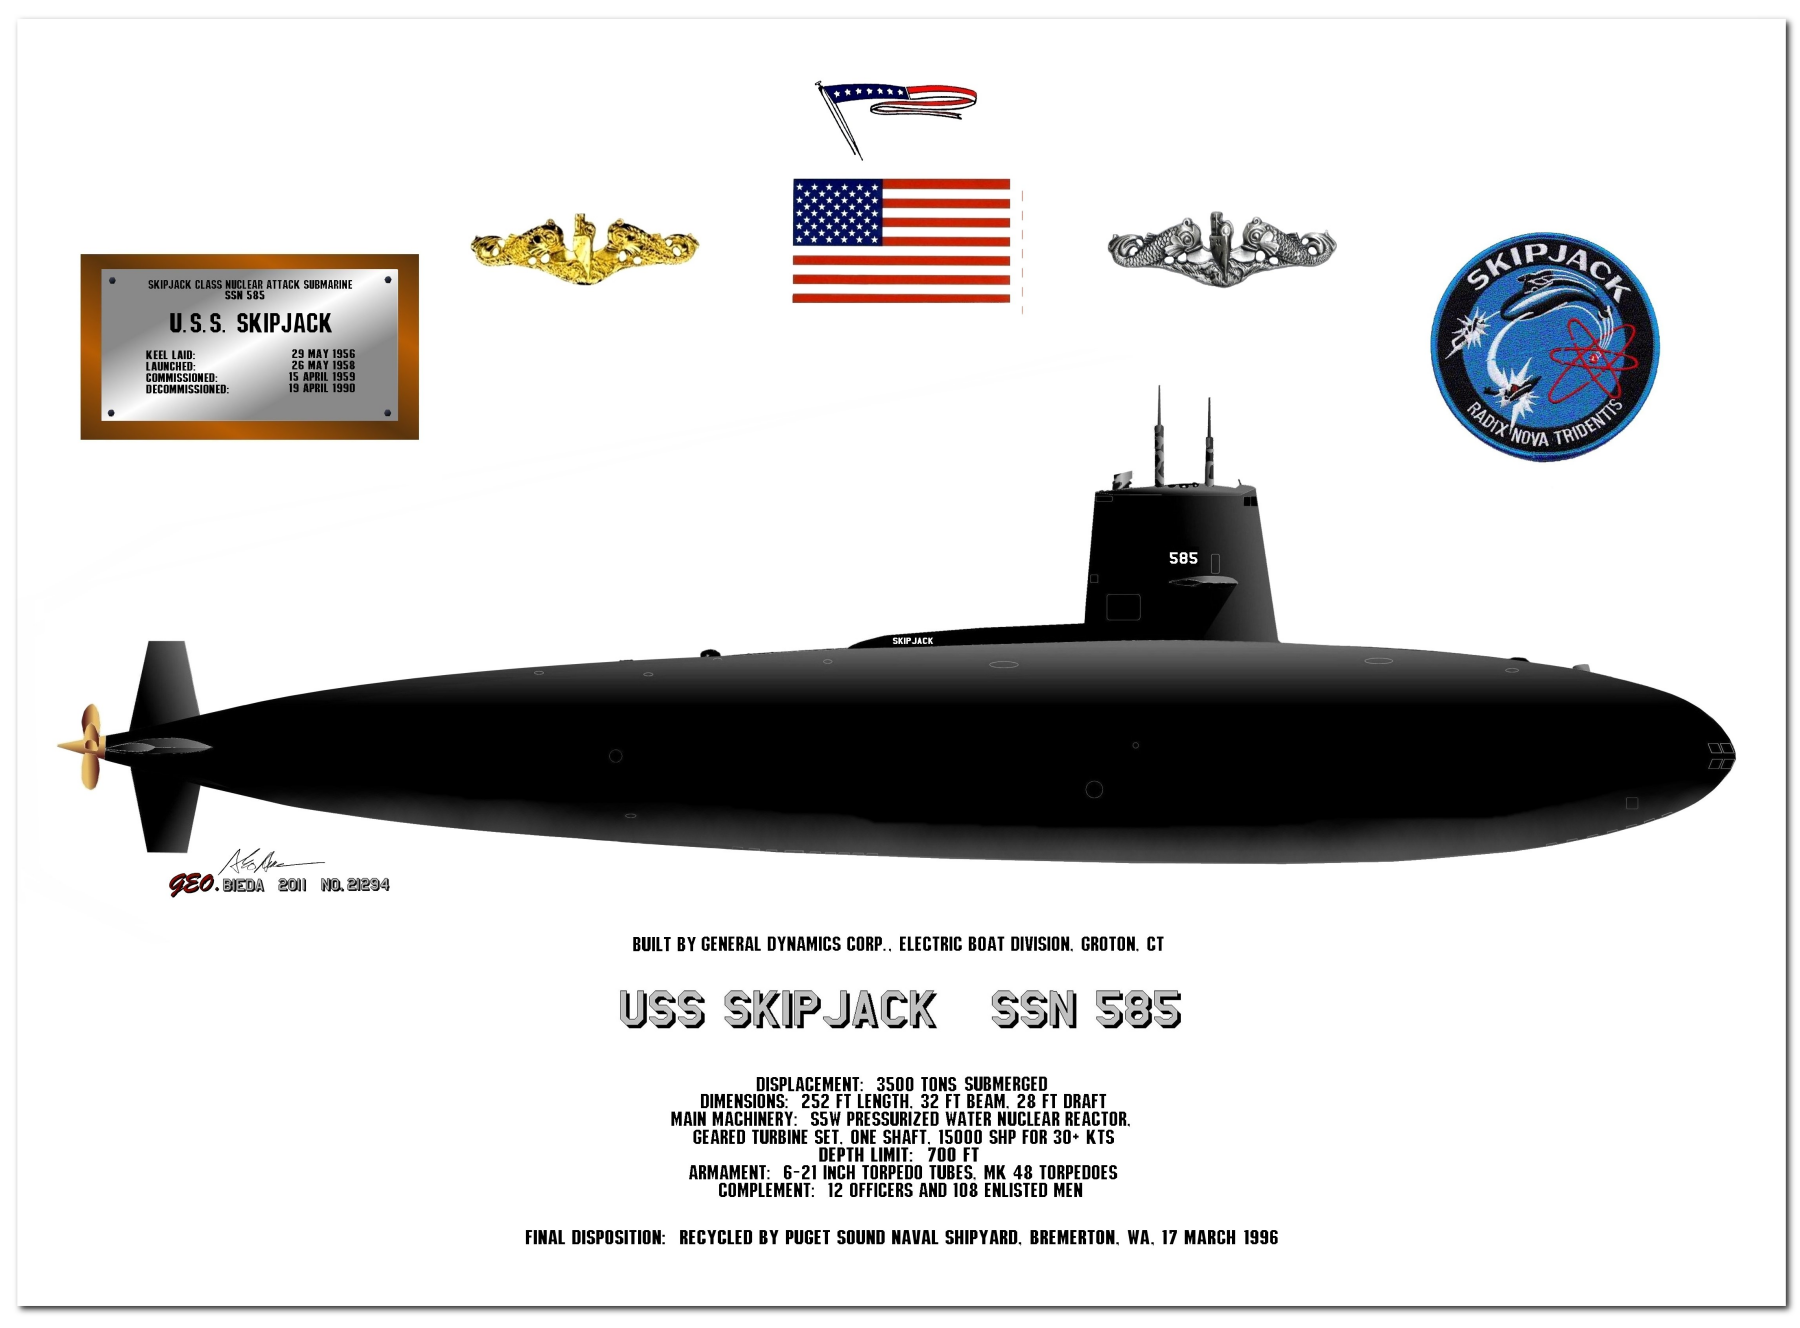 Skipjack Class Nuclear Fast Attack Submarines